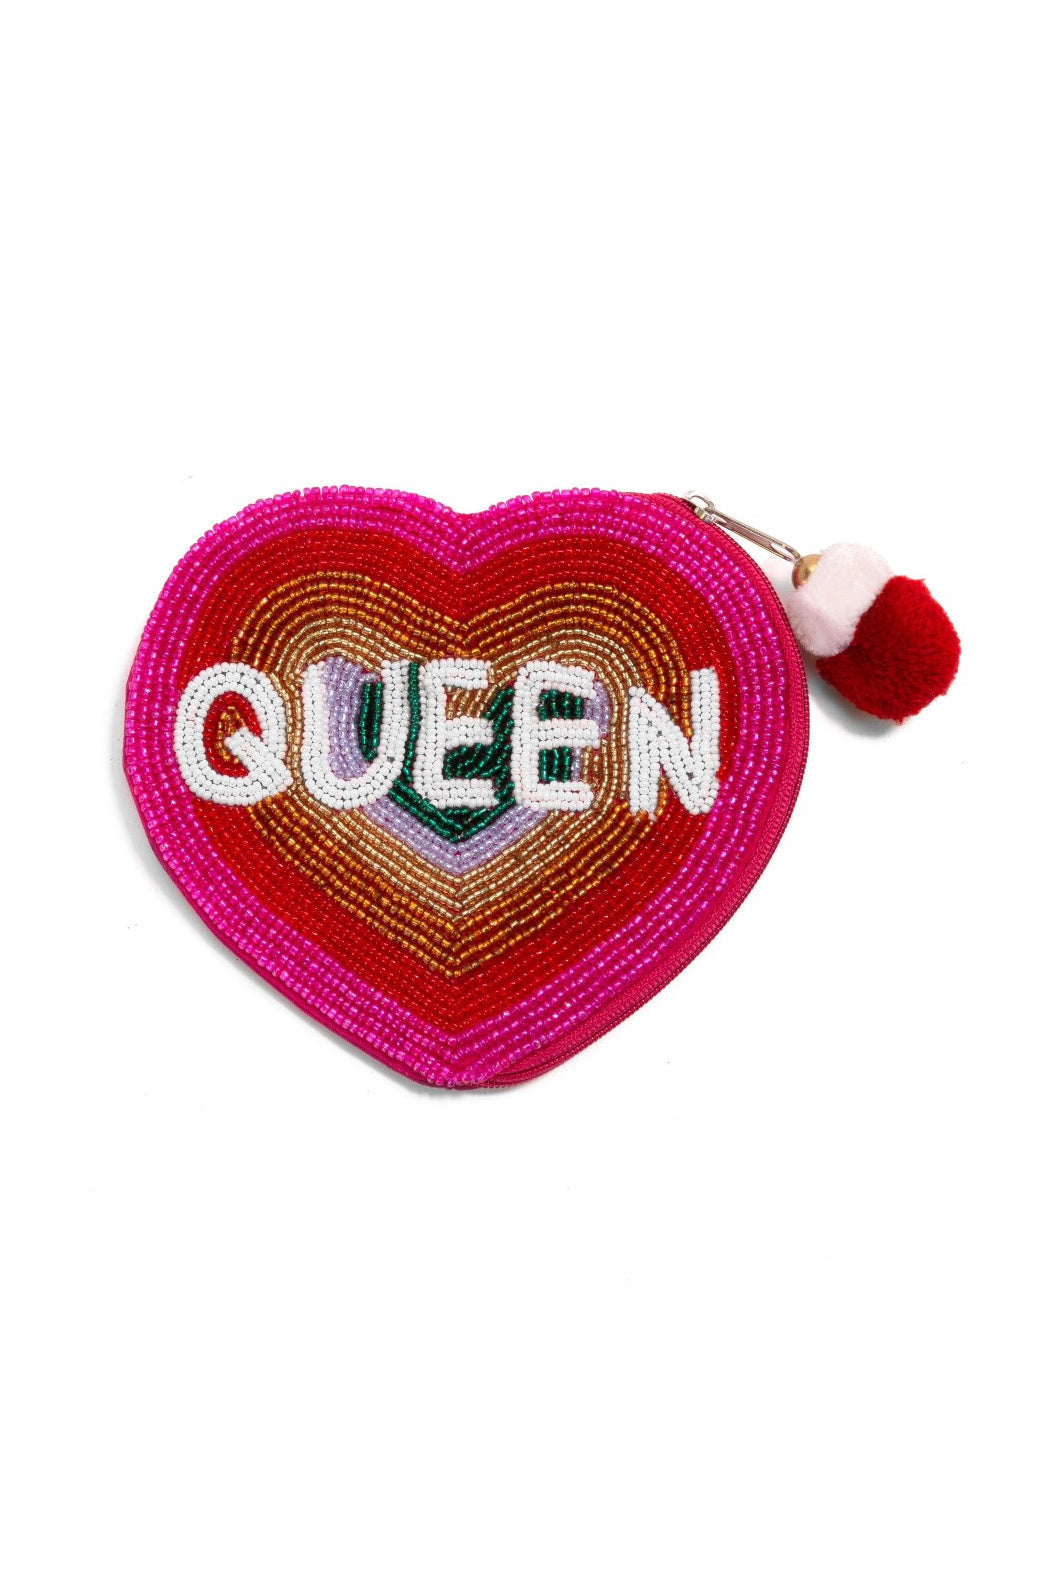 Queen Heart Shaped Beaded Pouch Bag